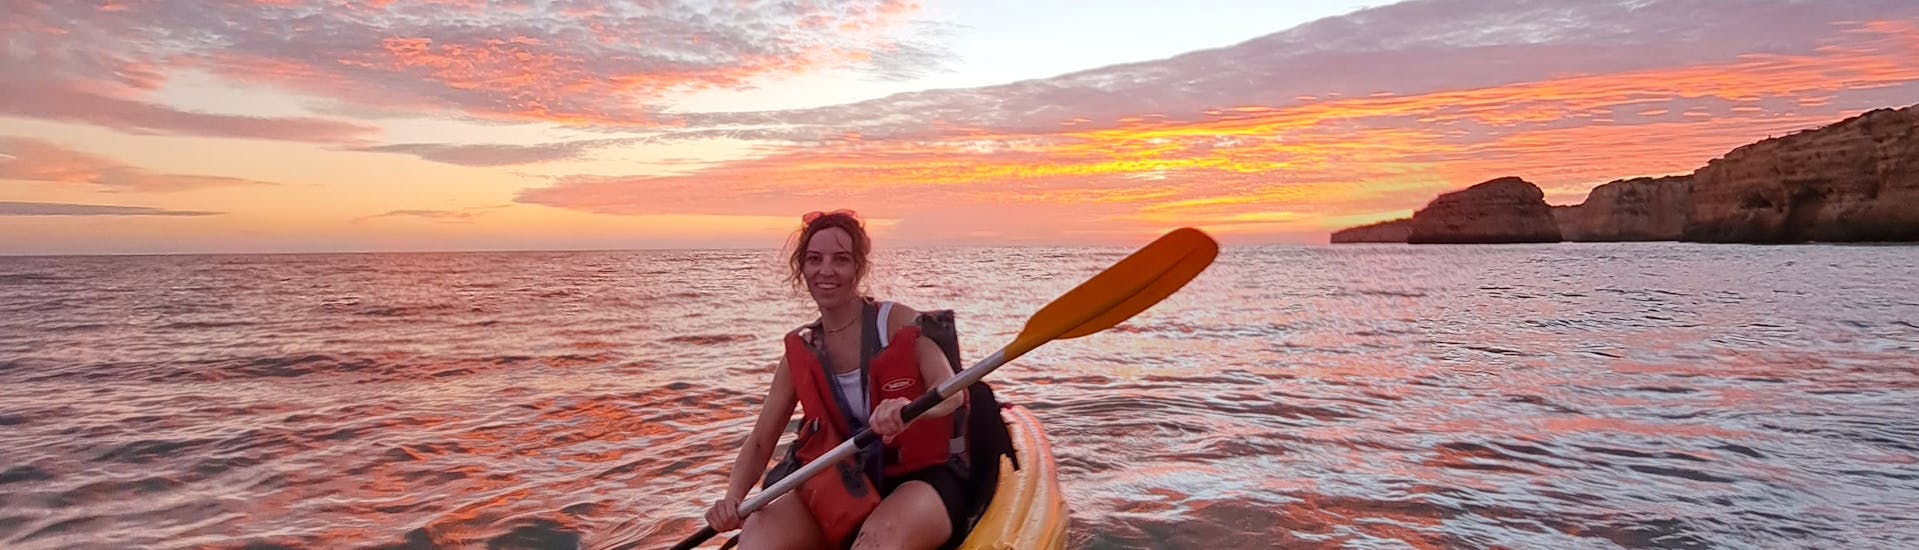 A woman enjoying our private Sunset Kayak Tour to the Benagil Caves and Marinha beach from Albandeira from Albandeira Ecotours.